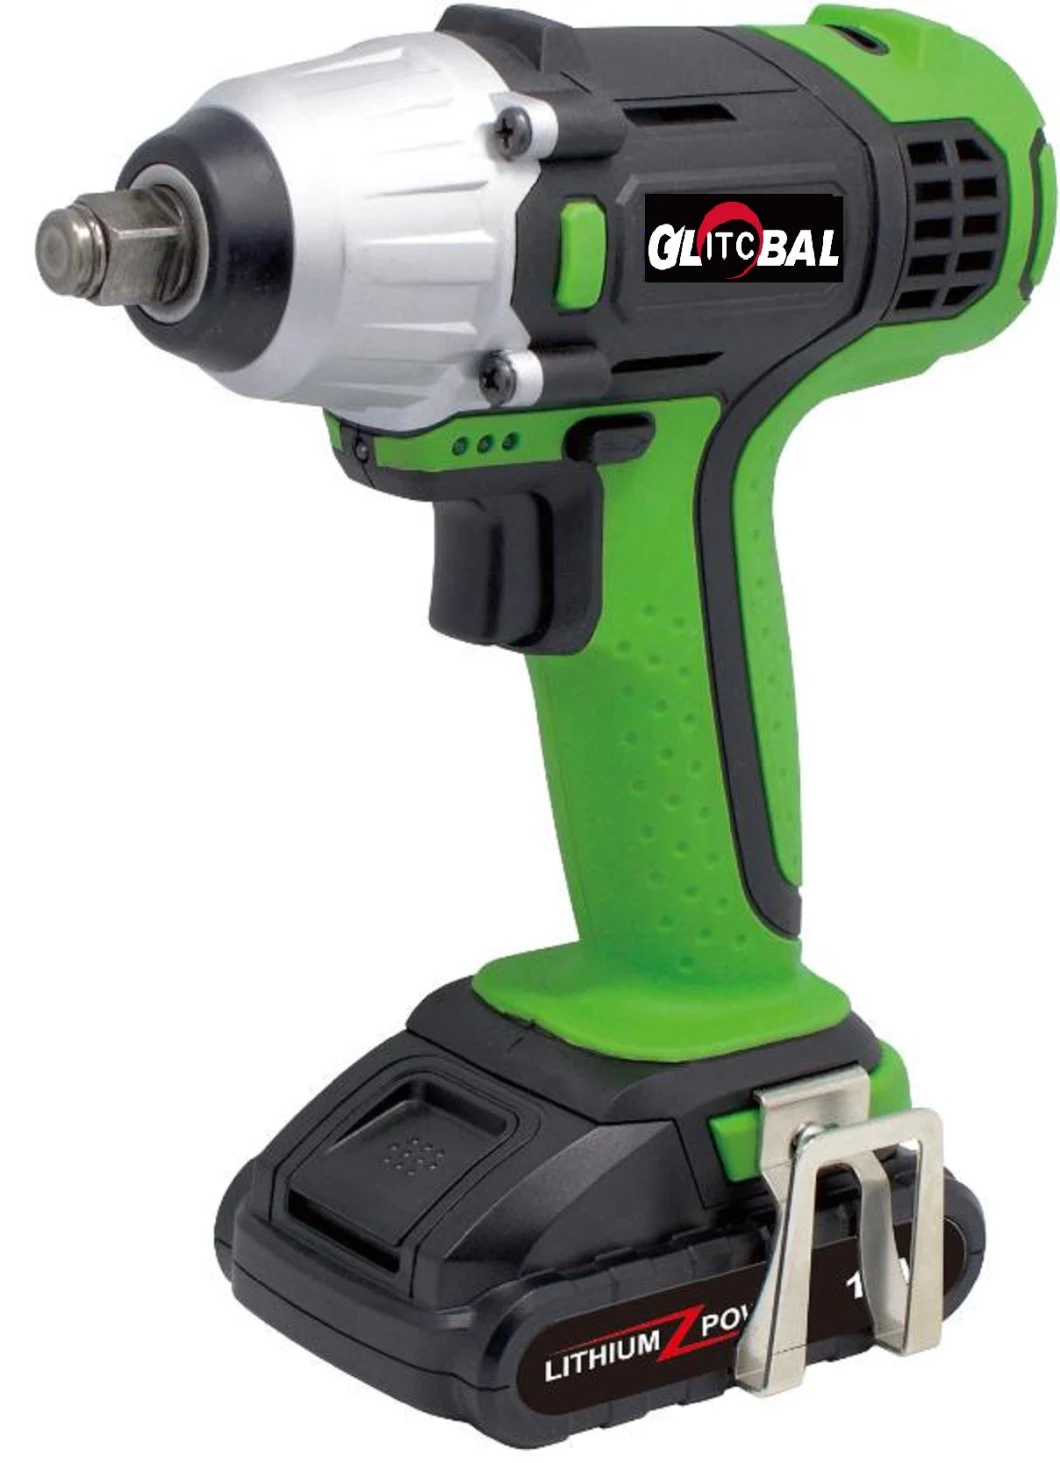 Greenline 18V (20V MAx) Lithium-Ion Battery Cordless/Electric Drill-Power Machine Tools